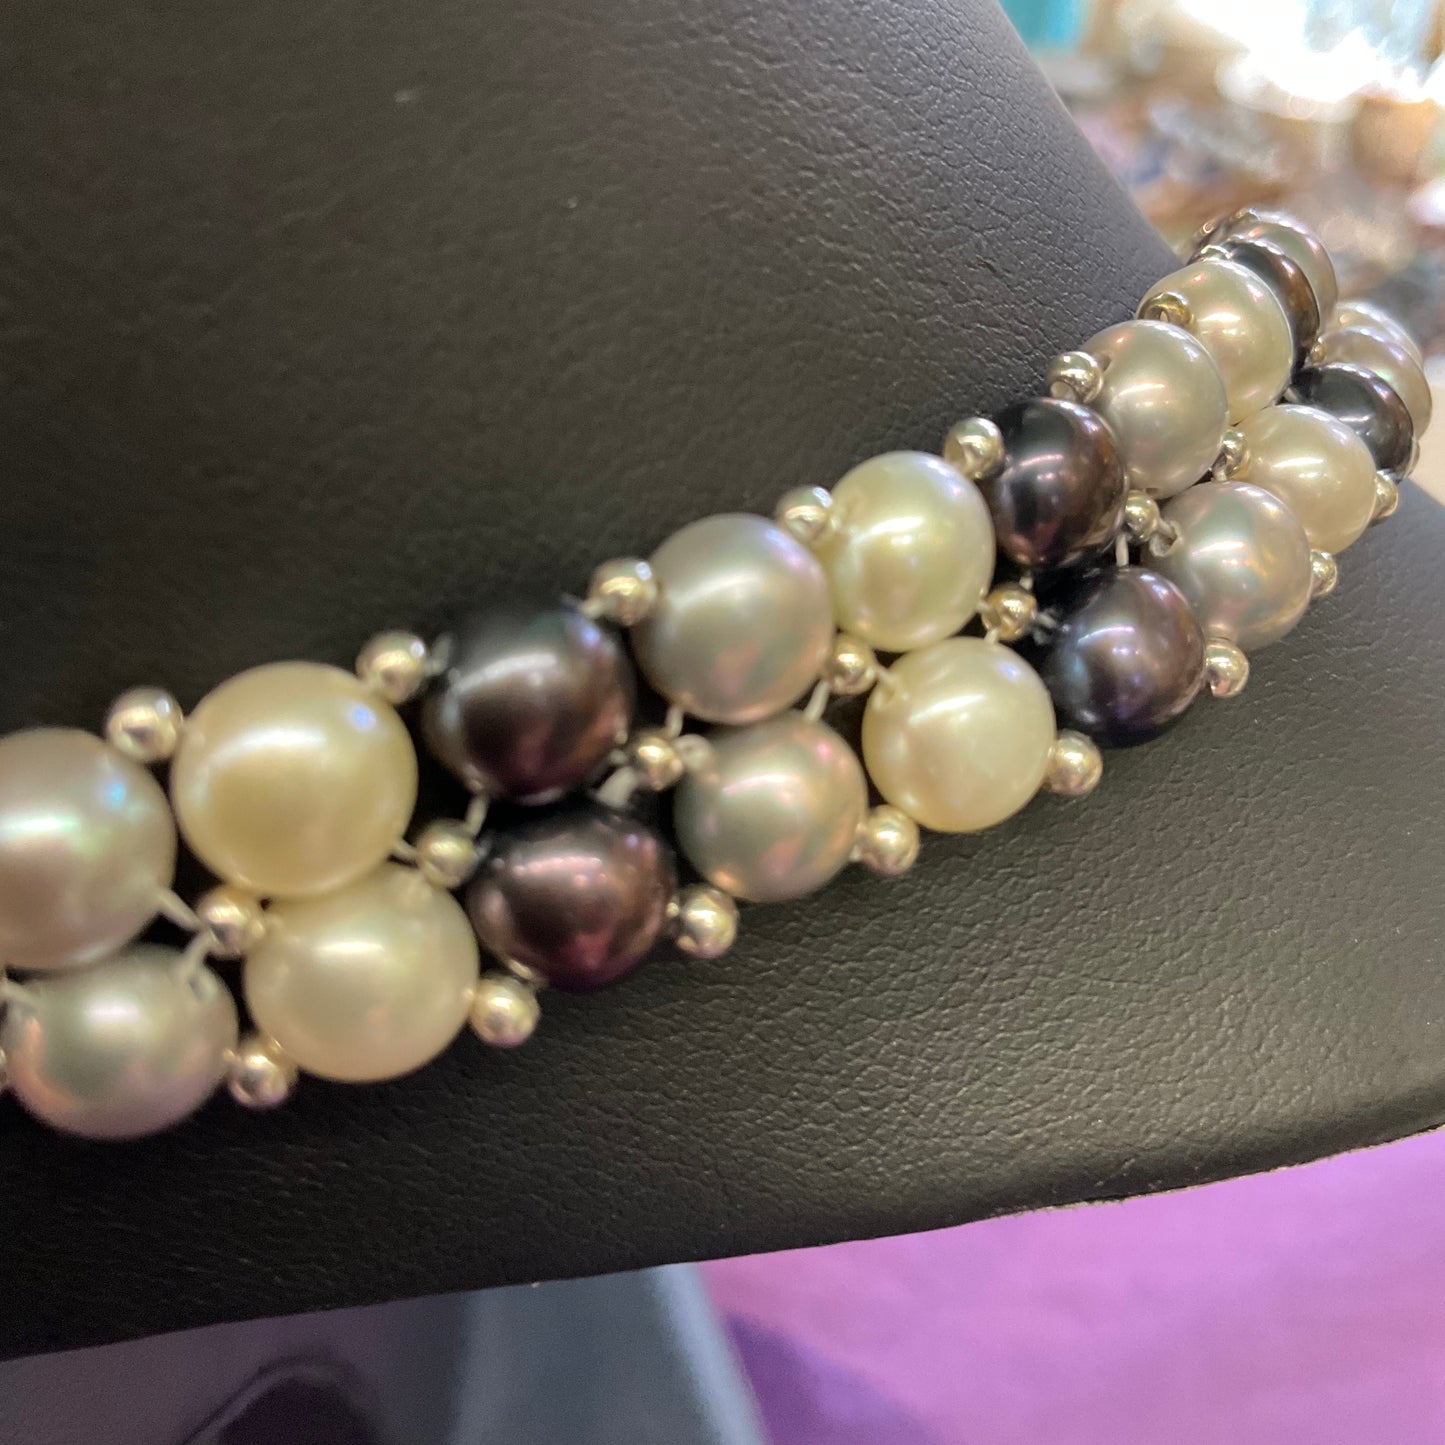 Vintage fresh water pearl monotone beaded necklace, silver (925) clasp, ivory, silver, purple, prom